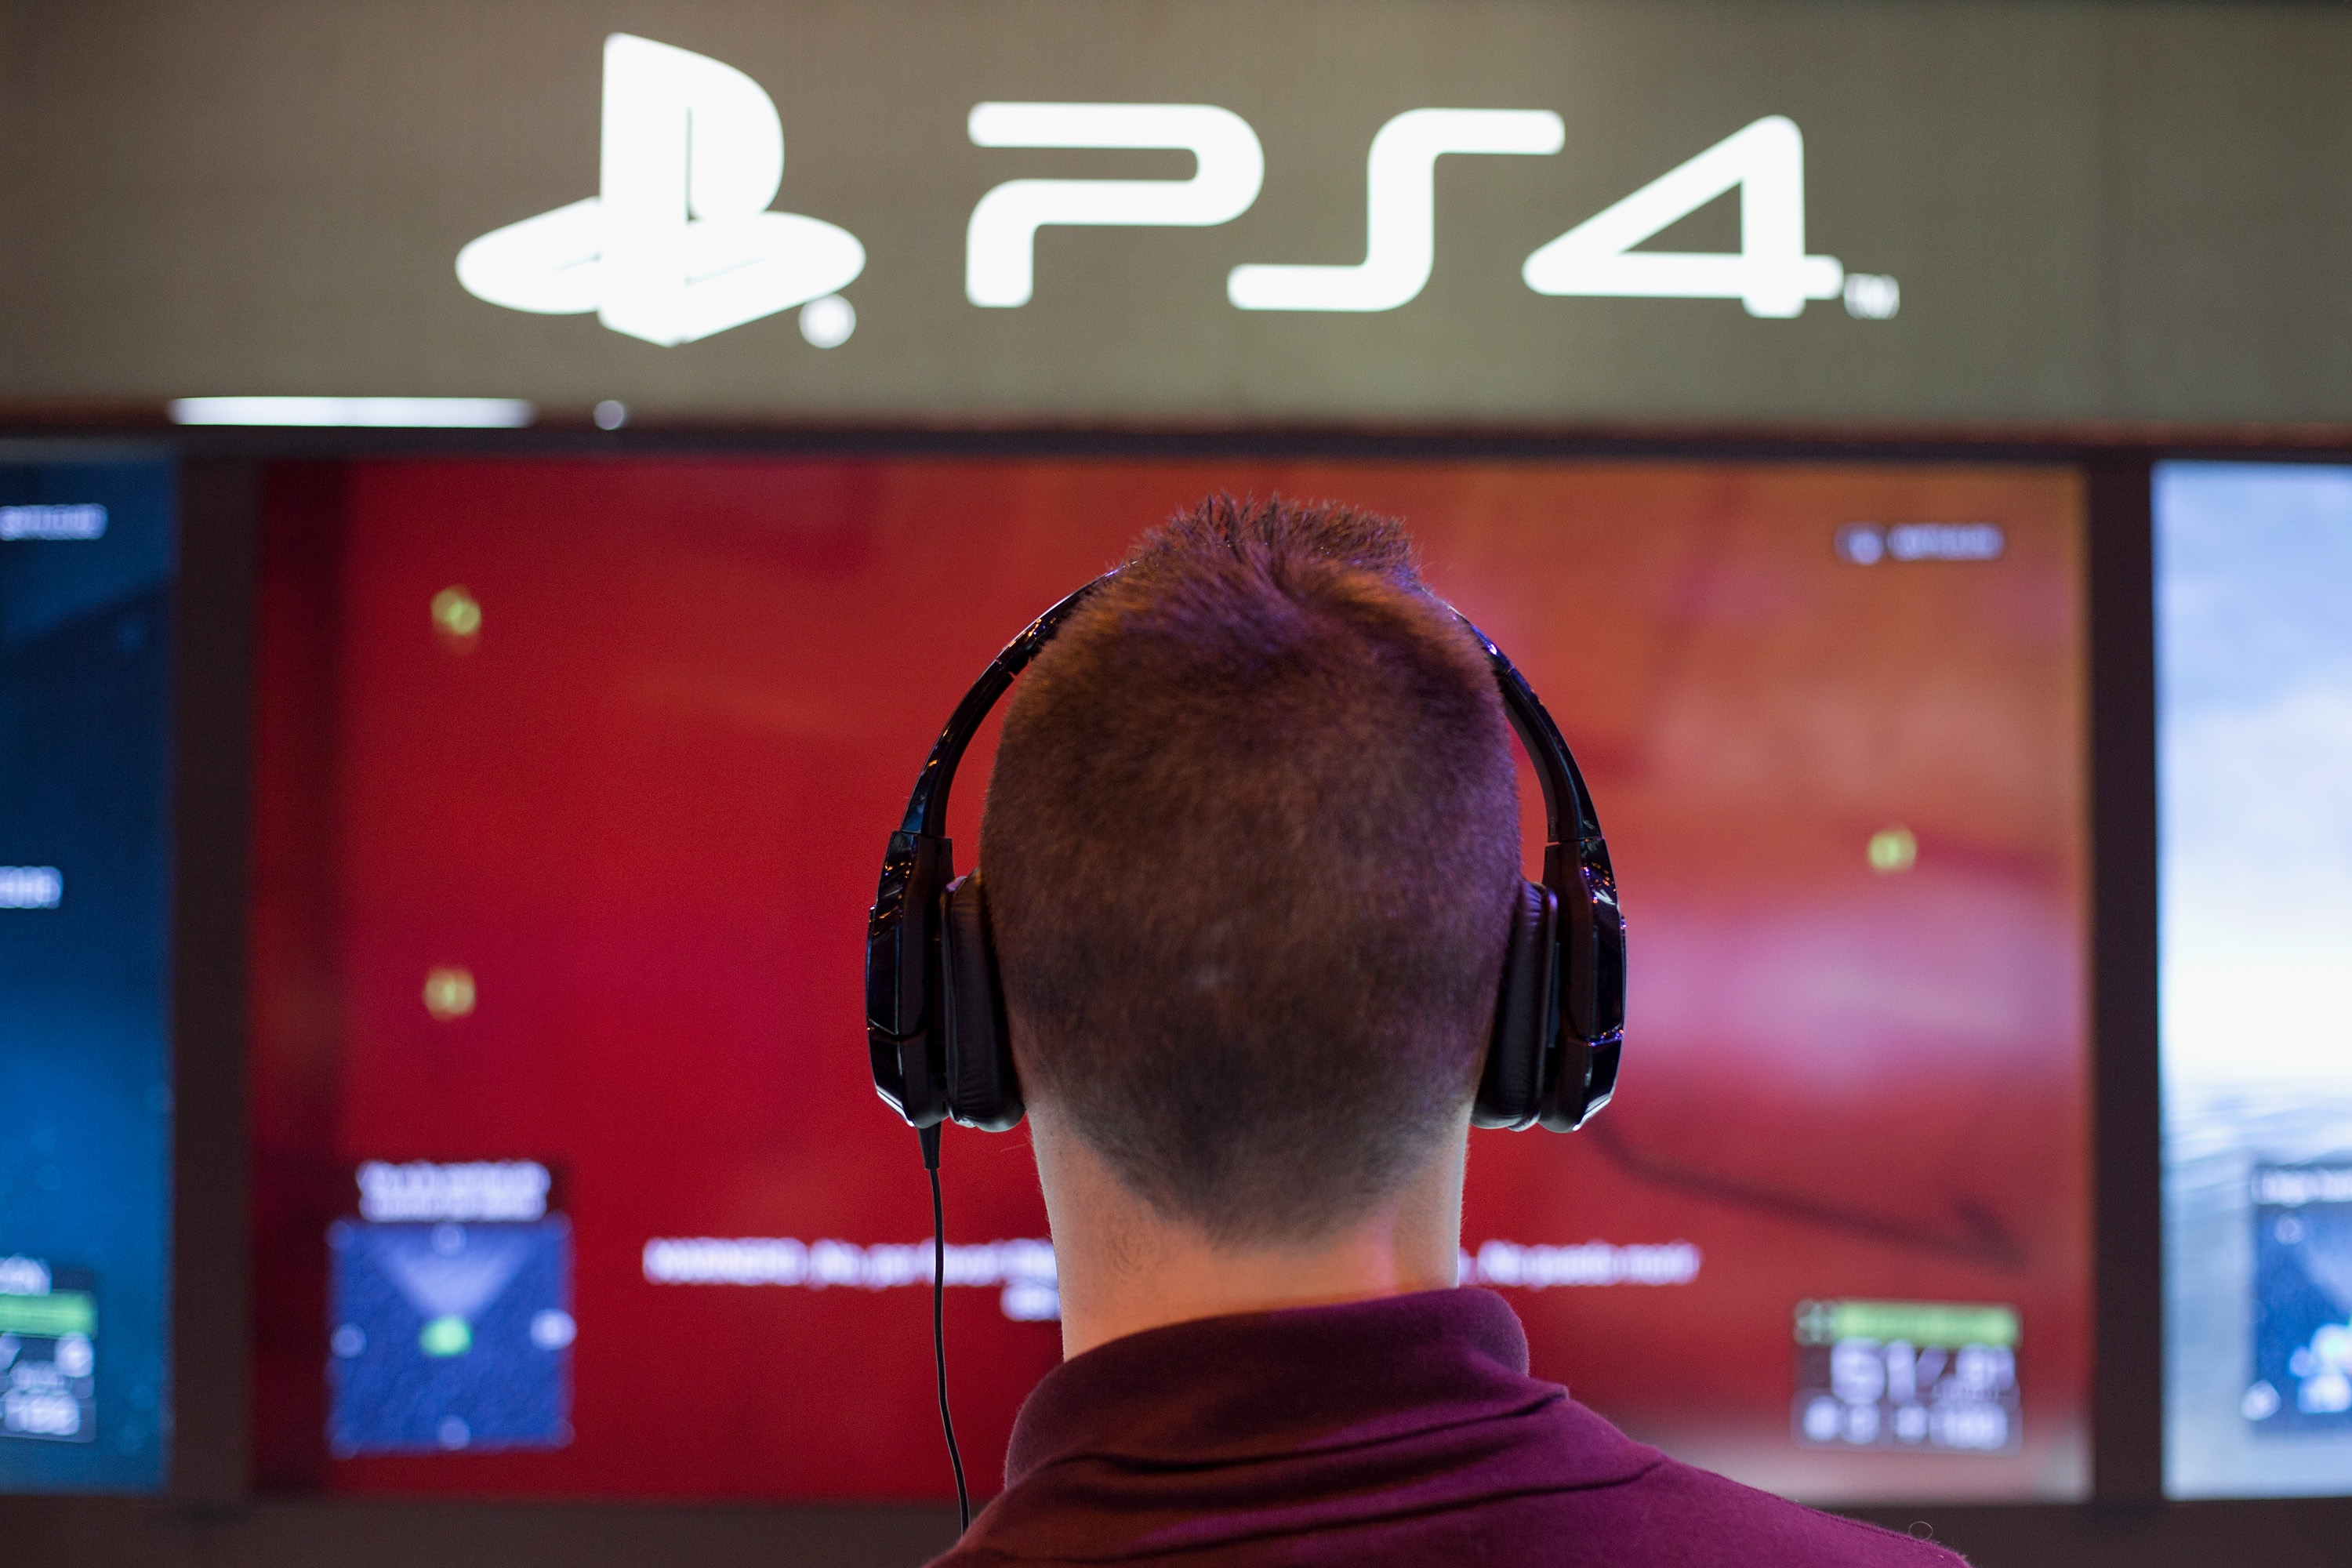 A man plays on a Playstation 4 at Madrid Games Week in IFEMA on November 9, 2013 in Madrid, Spain. (Pablo Blazquez Dominguez&mdash;Getty Images)